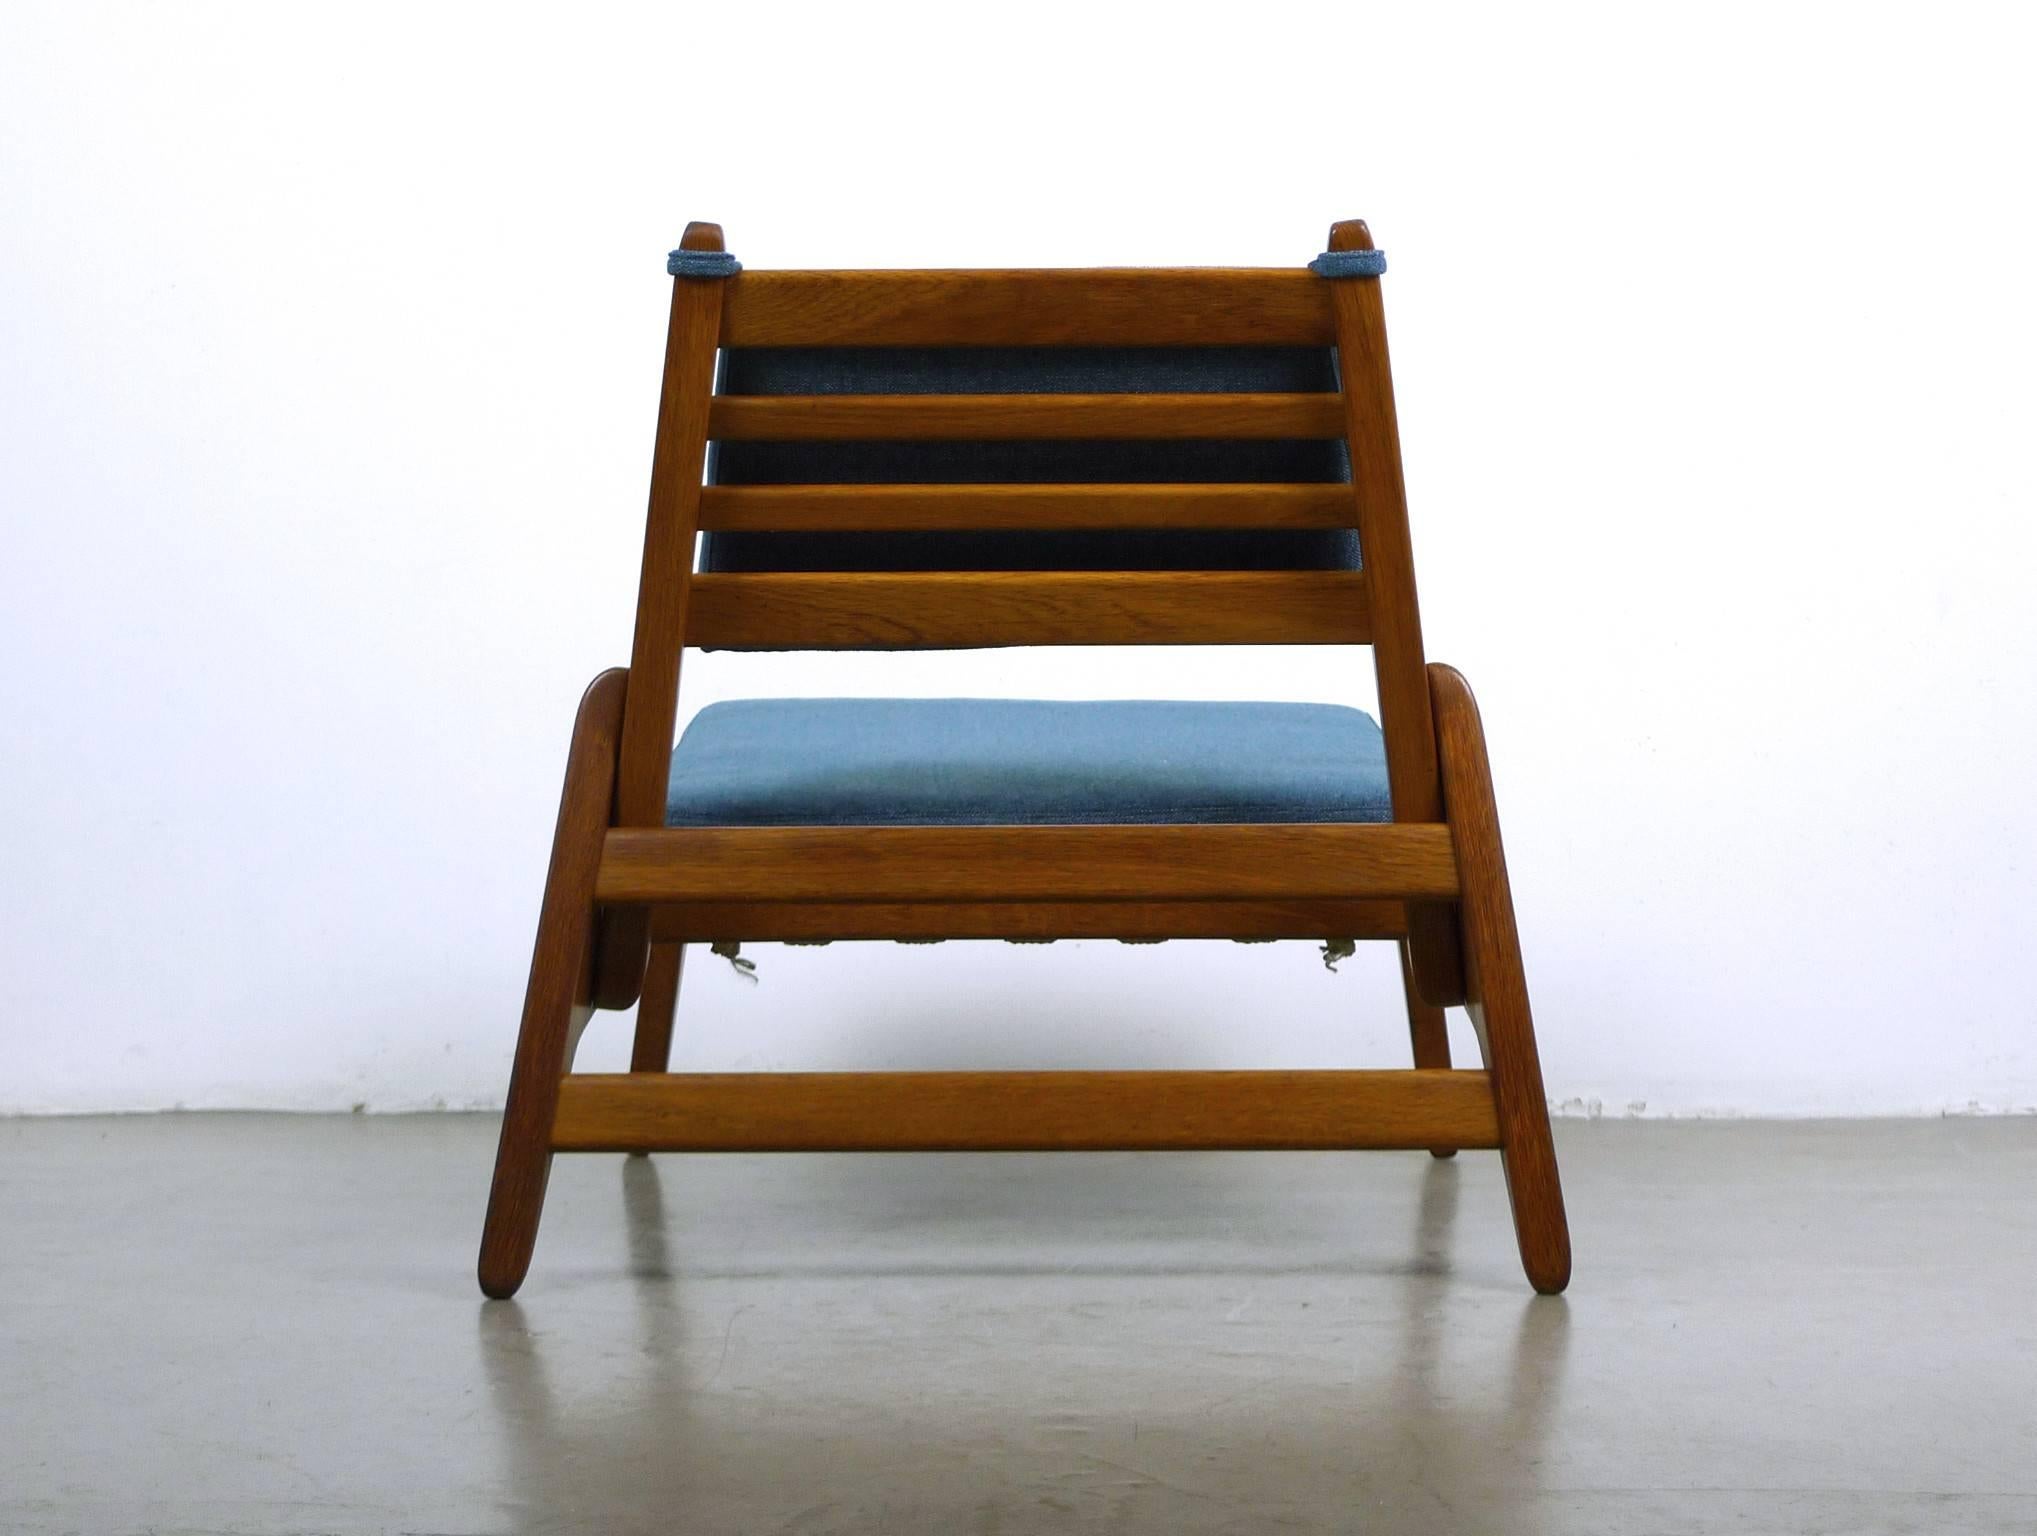 20th Century Low Lounge Chair with Ottoman from Germany, 1950s For Sale